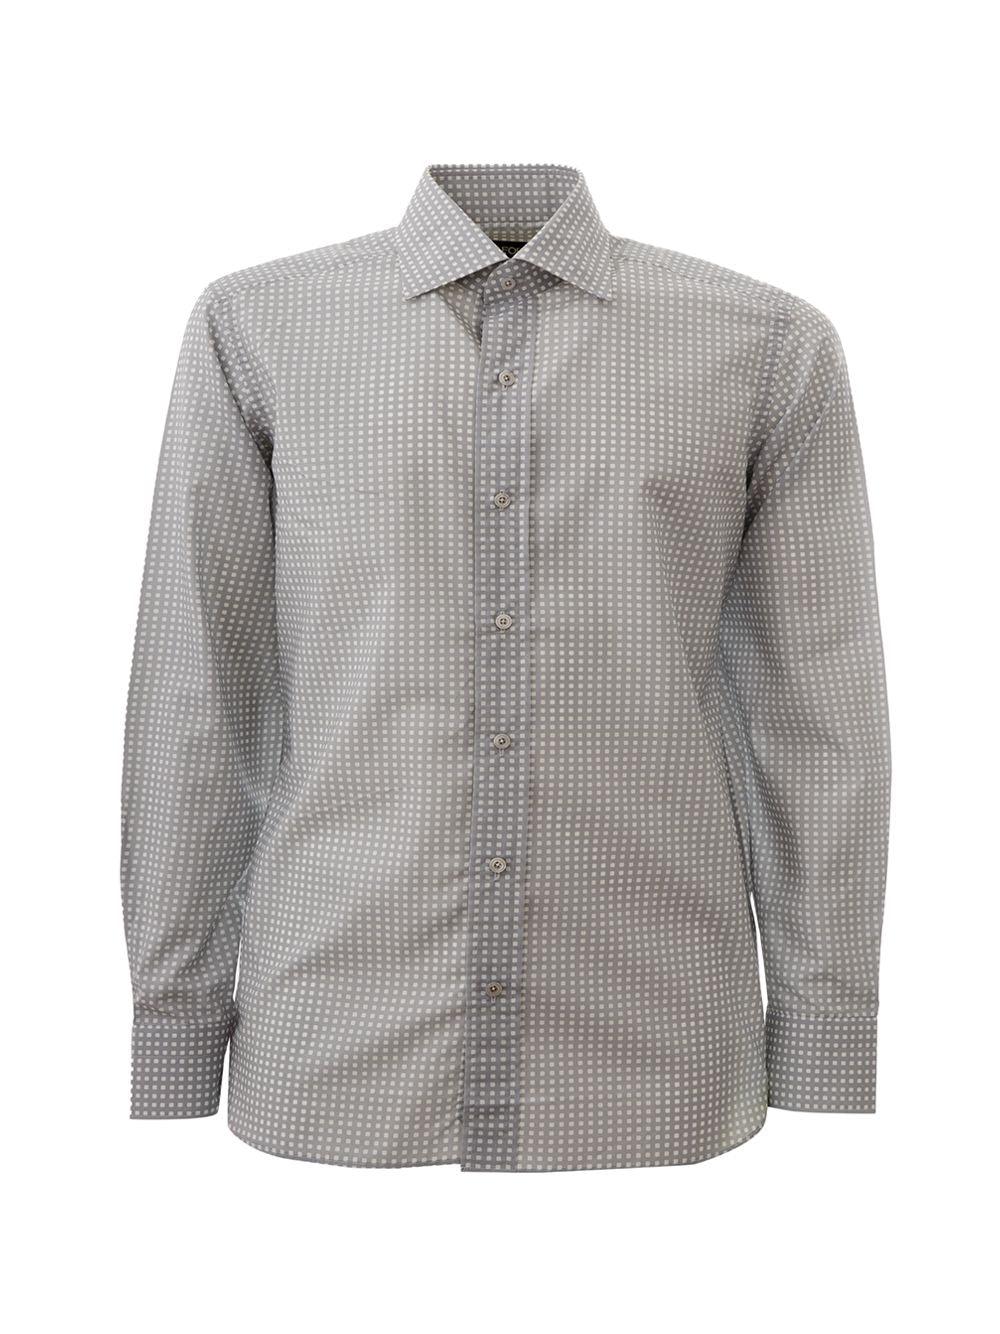 Tom Ford Regular Fit Shirt with Micro Print allover - Ellie Belle